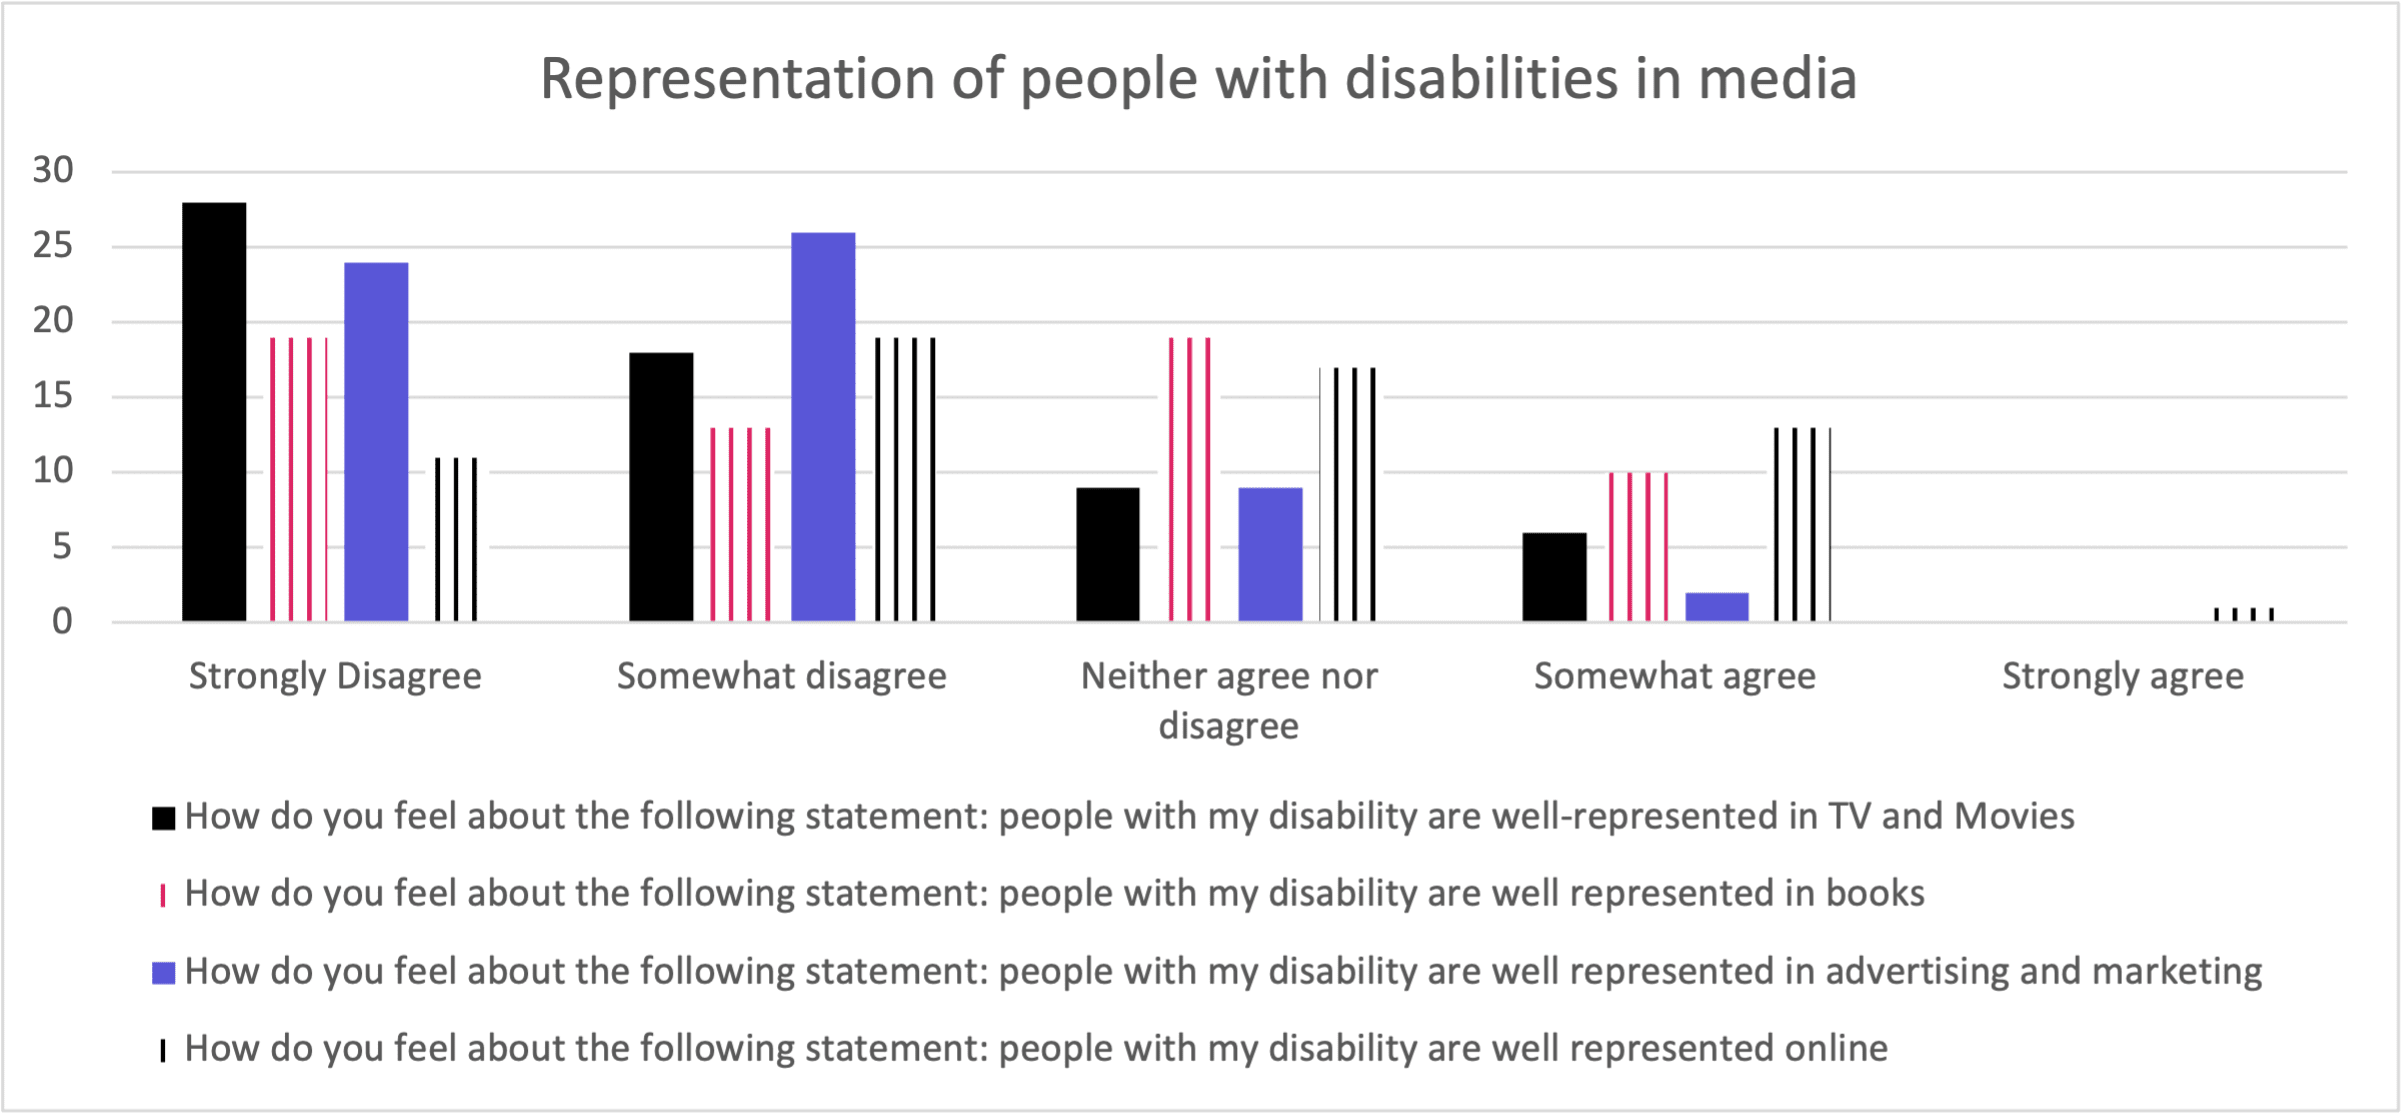 A chart showing that overall, most people with disabilities surveyed strongly or somewhat disagree that people with disabilities are well represented in TV, movies, books, advertising, marketing, and online. Some neither agree nor disagree. Very few somewhat agree and nearly none strongly agree.